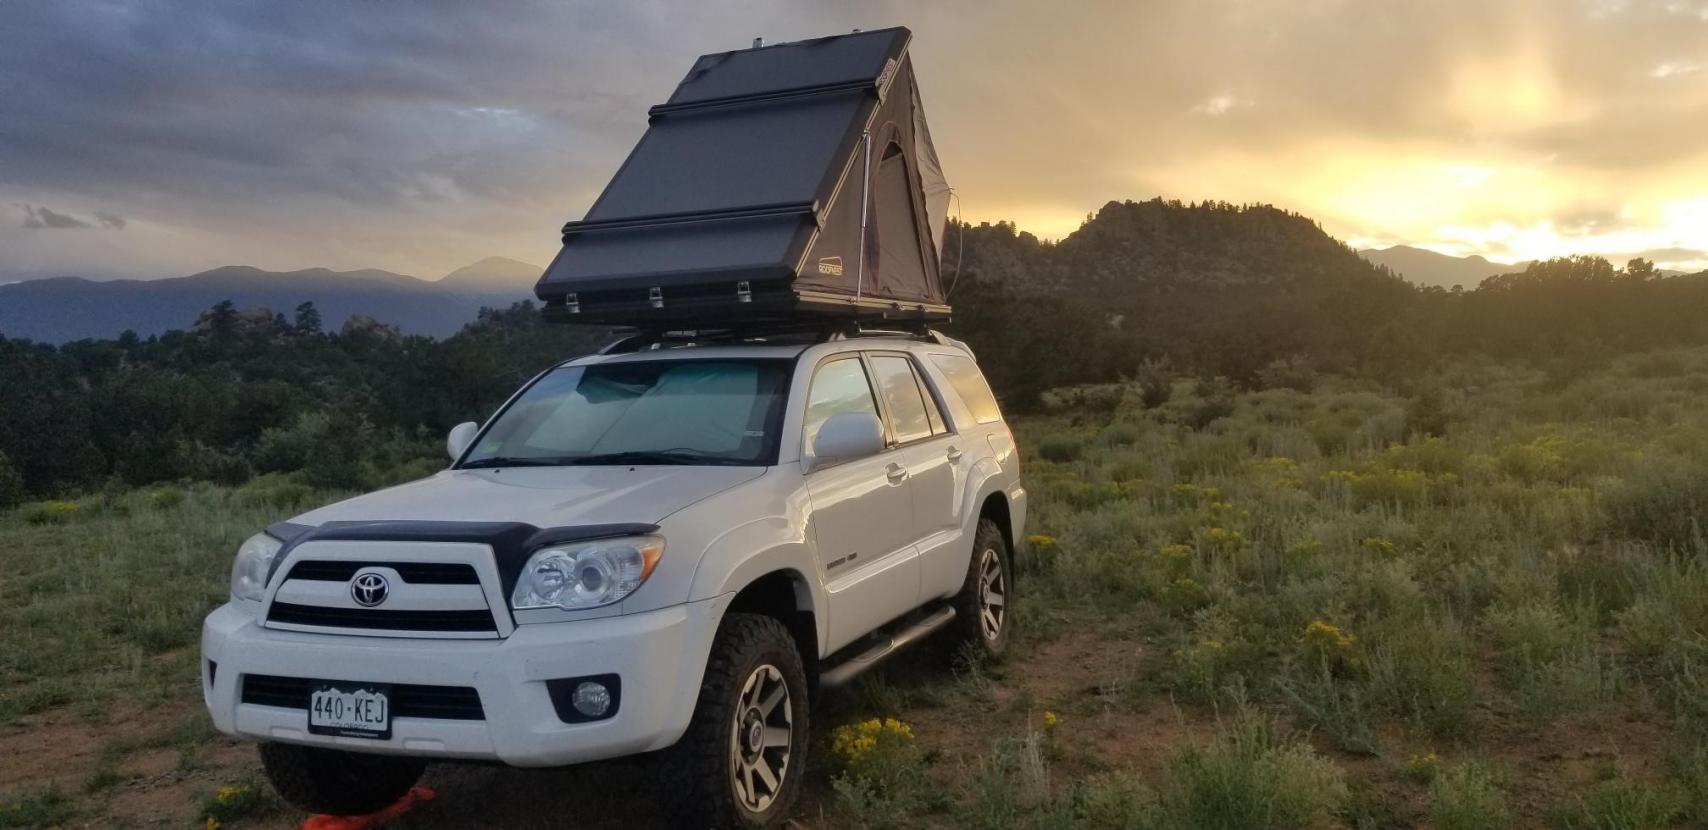 Can you put a Roof Top Tent on 4 runner factory roof rack-4runner_july2021-jpg